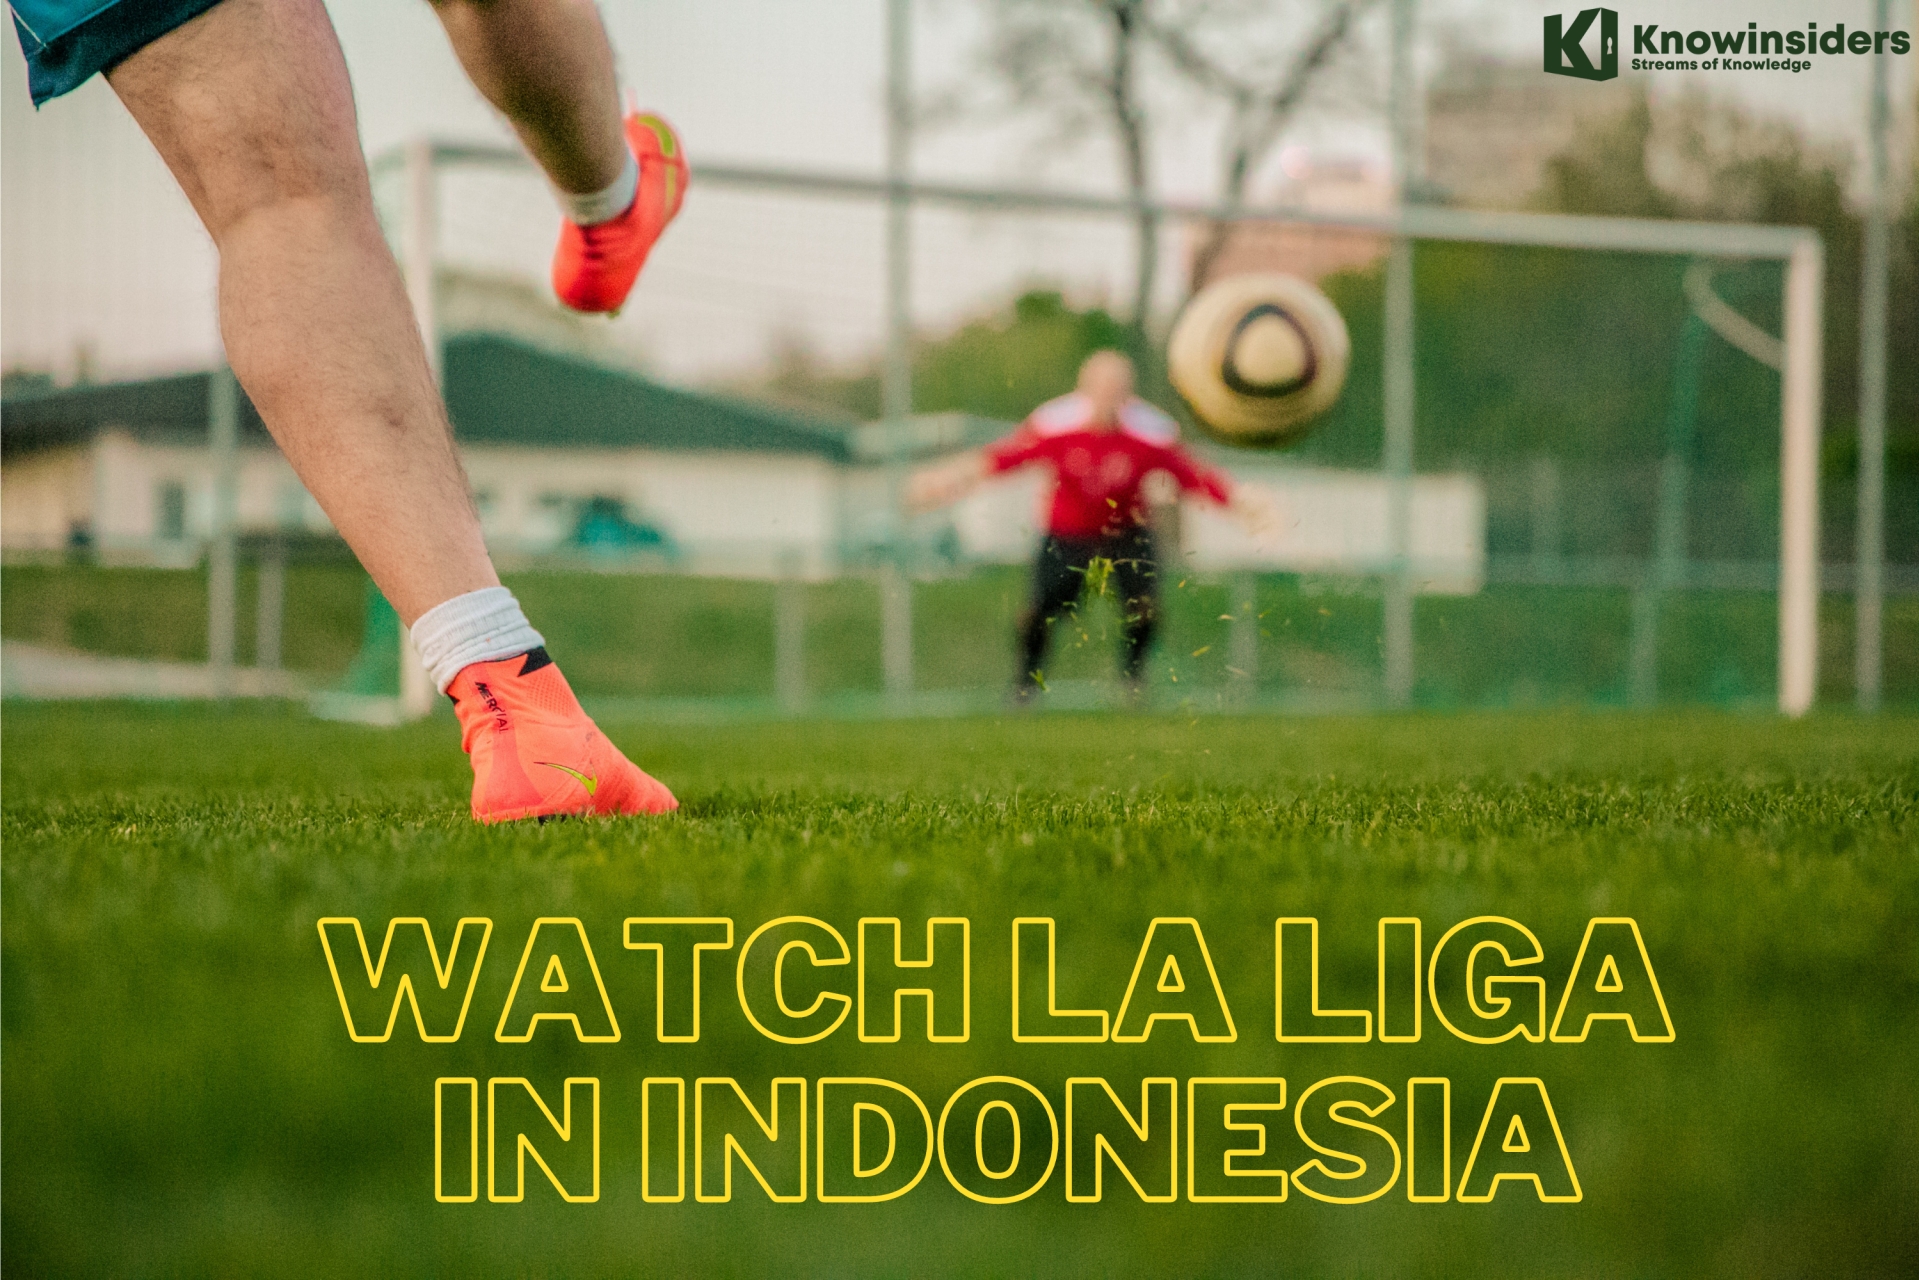 Watch Live Spain La Liga In Indonesia for FREE: TV Channel, Live Stream, Online